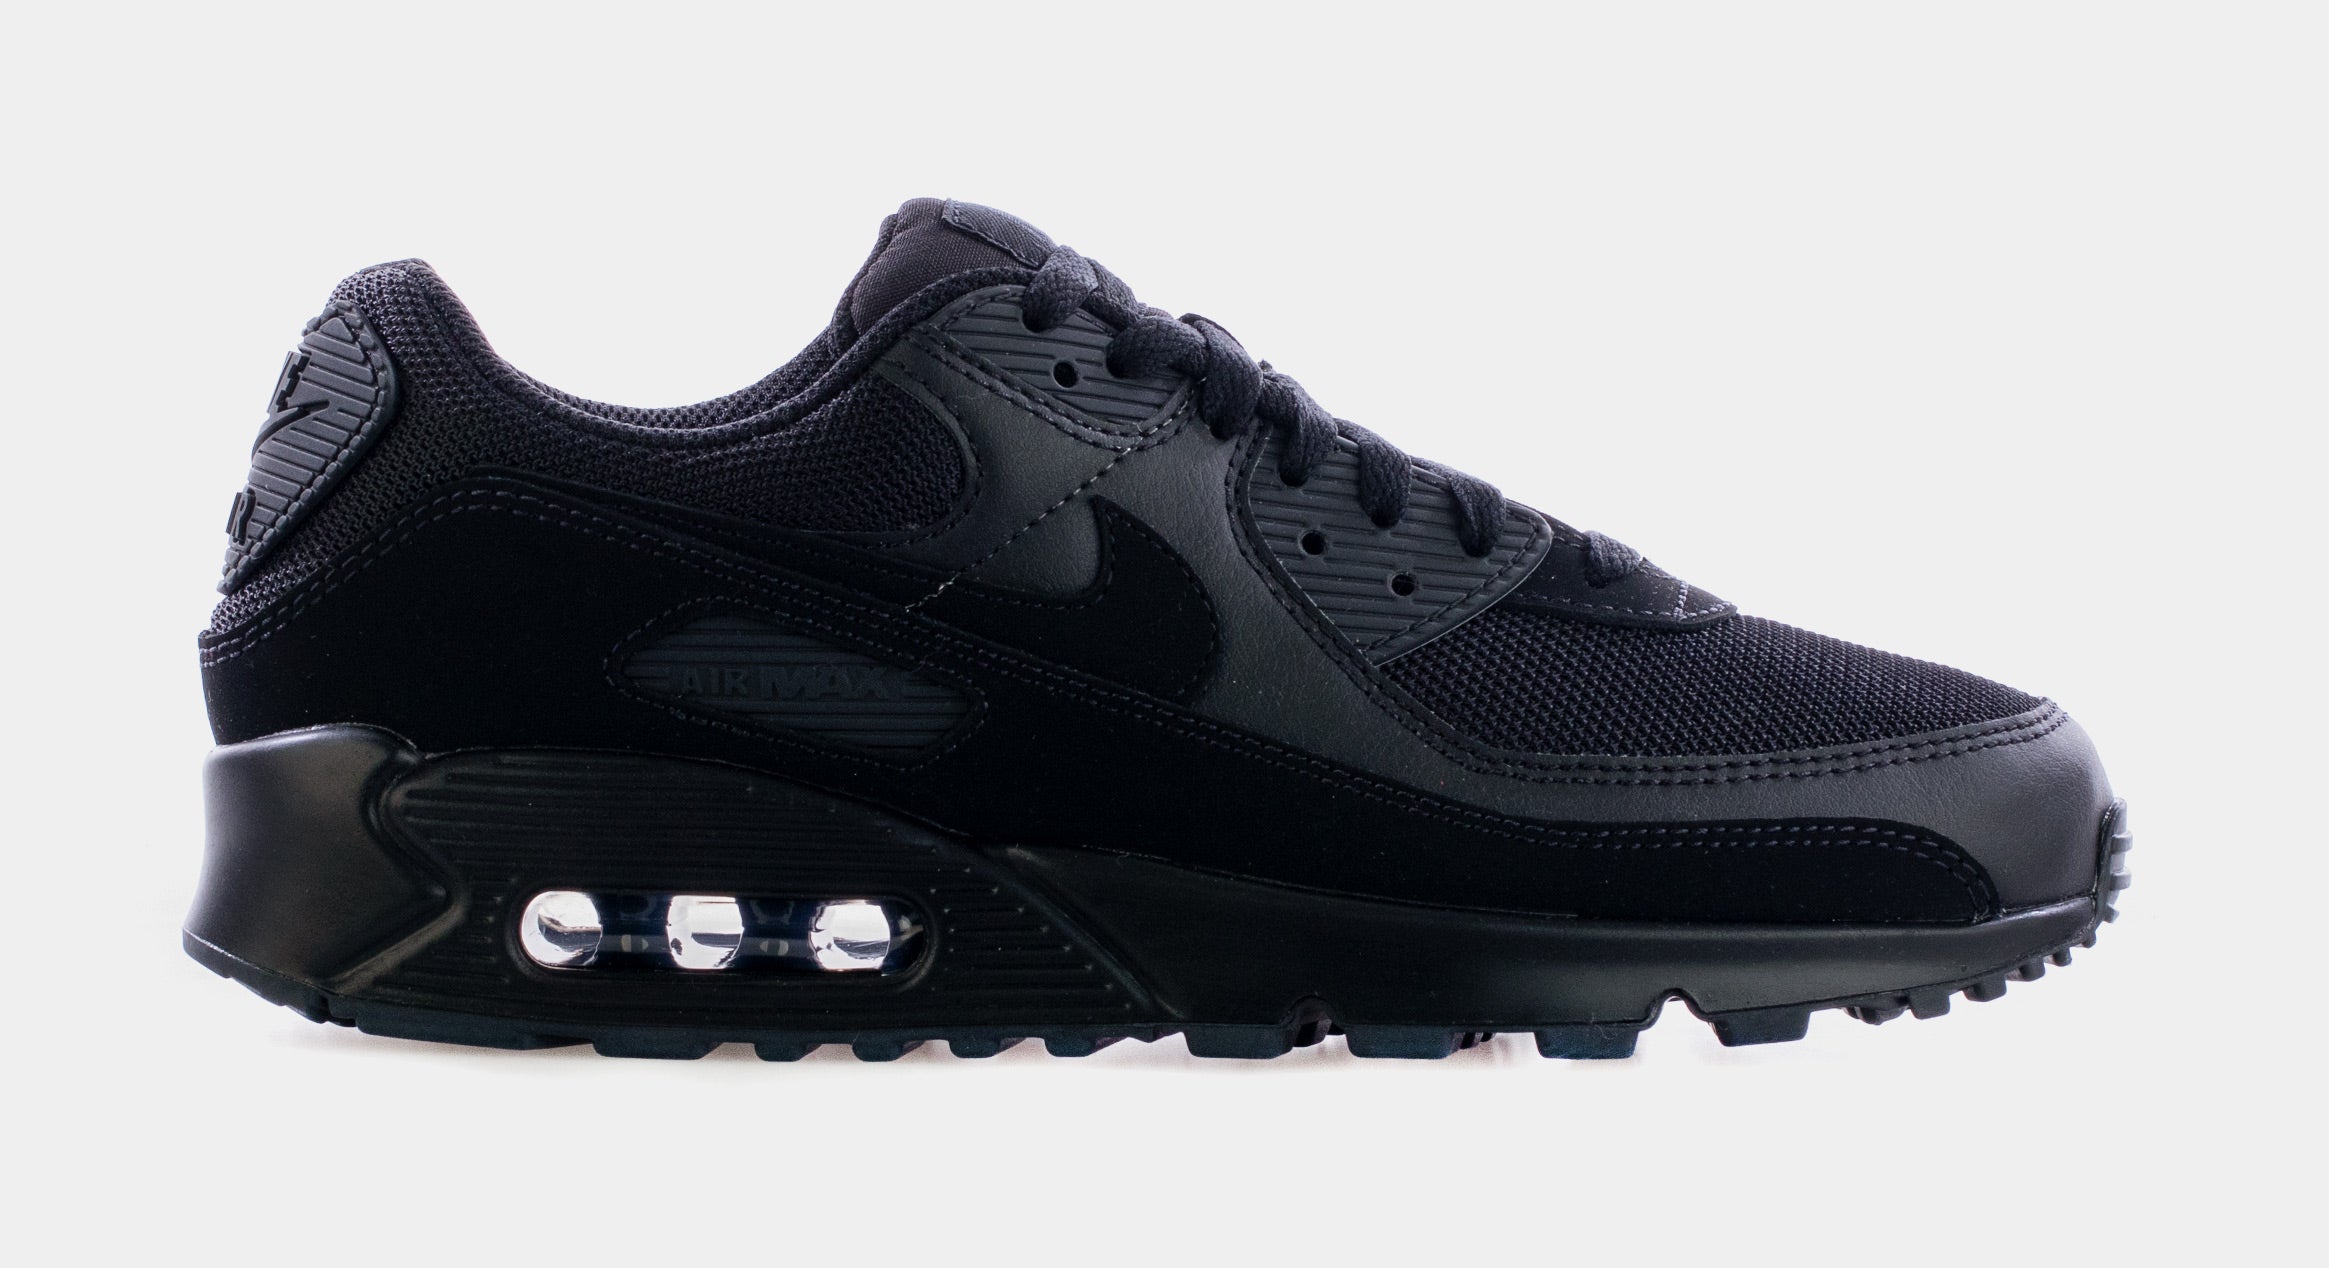 Marquee personale folder Nike Air Max 90 Mens Running Shoe Black Black CN8490-003 – Shoe Palace